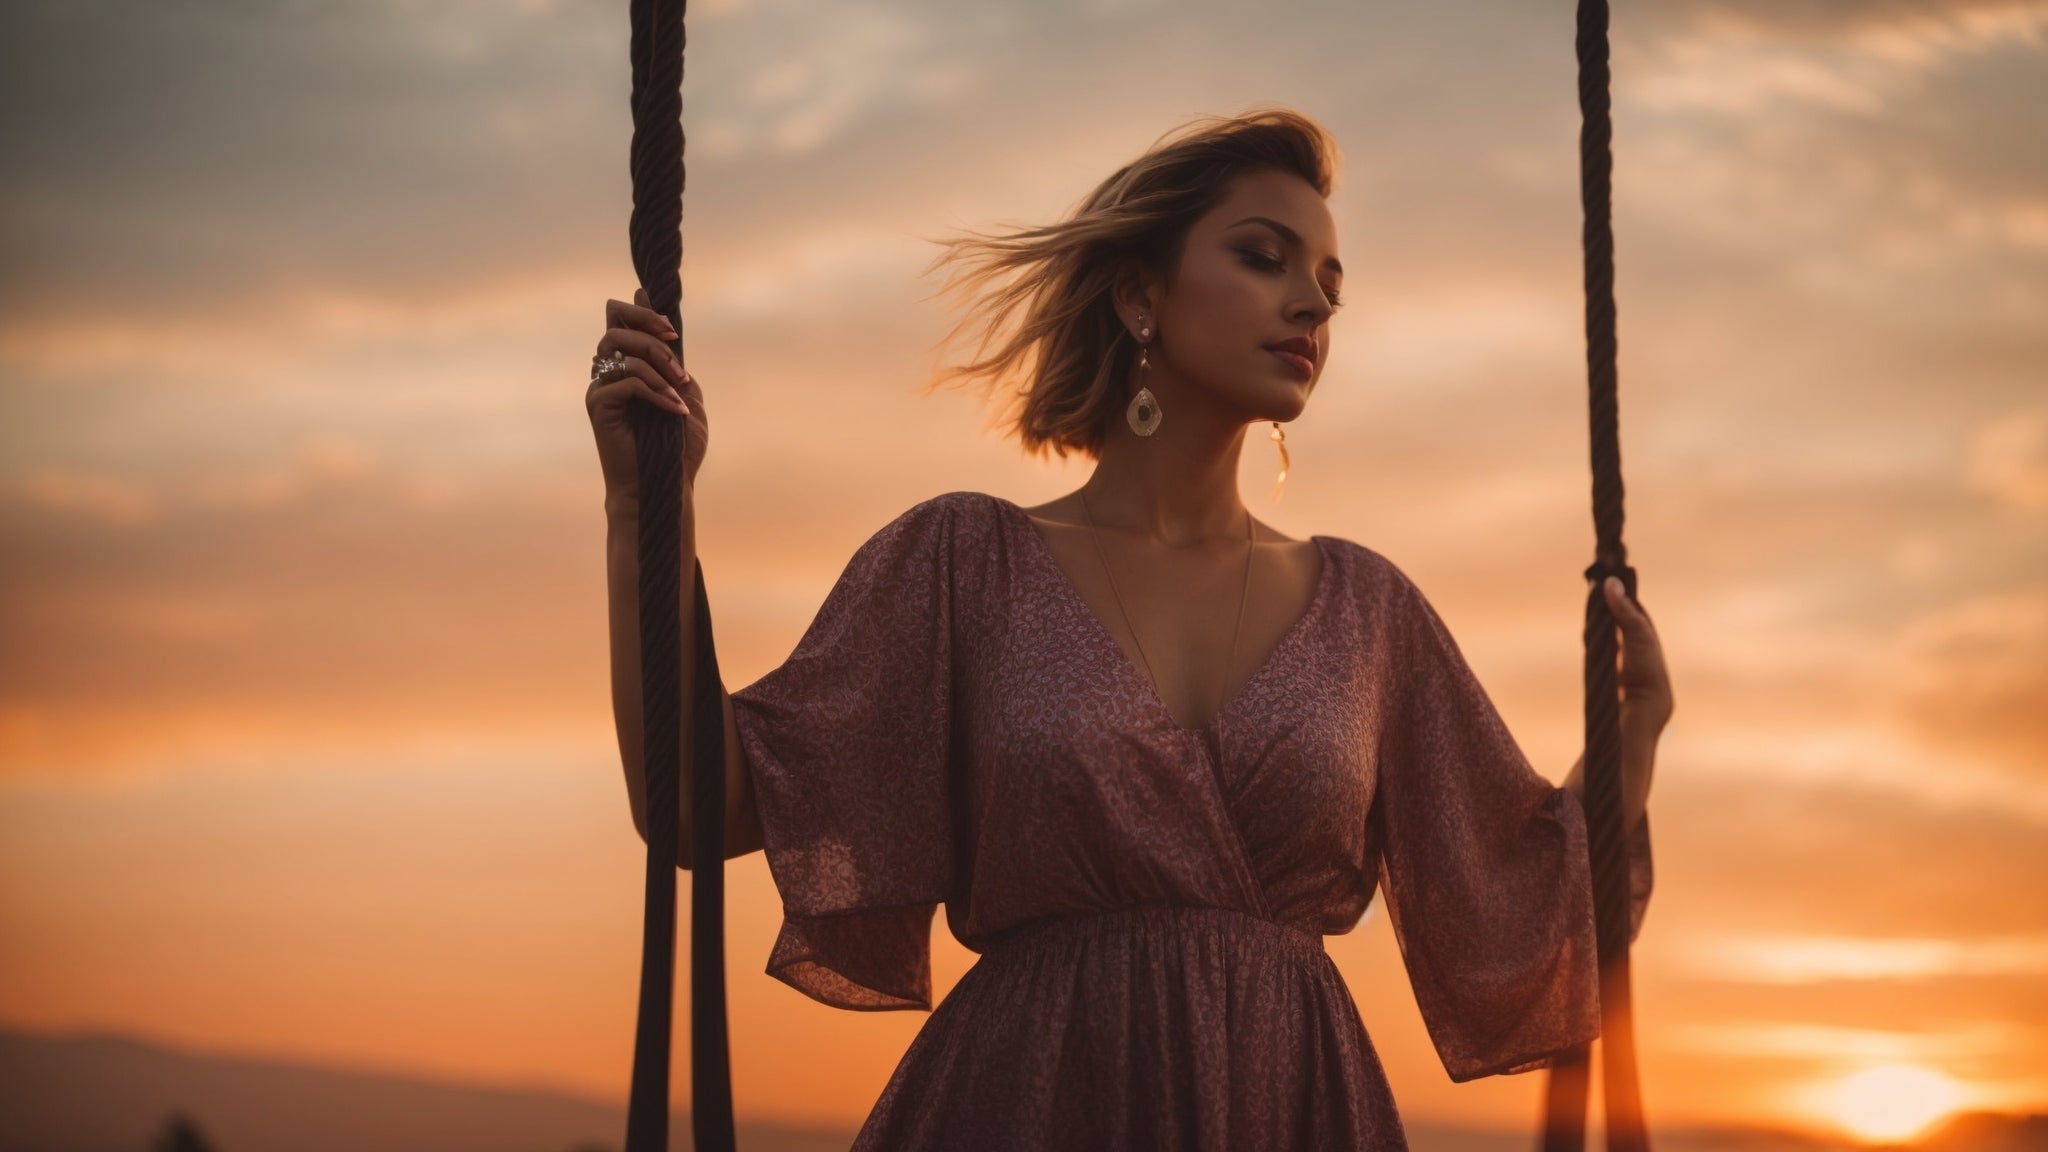 Blonde haired women in pink swing dress with sunset in background